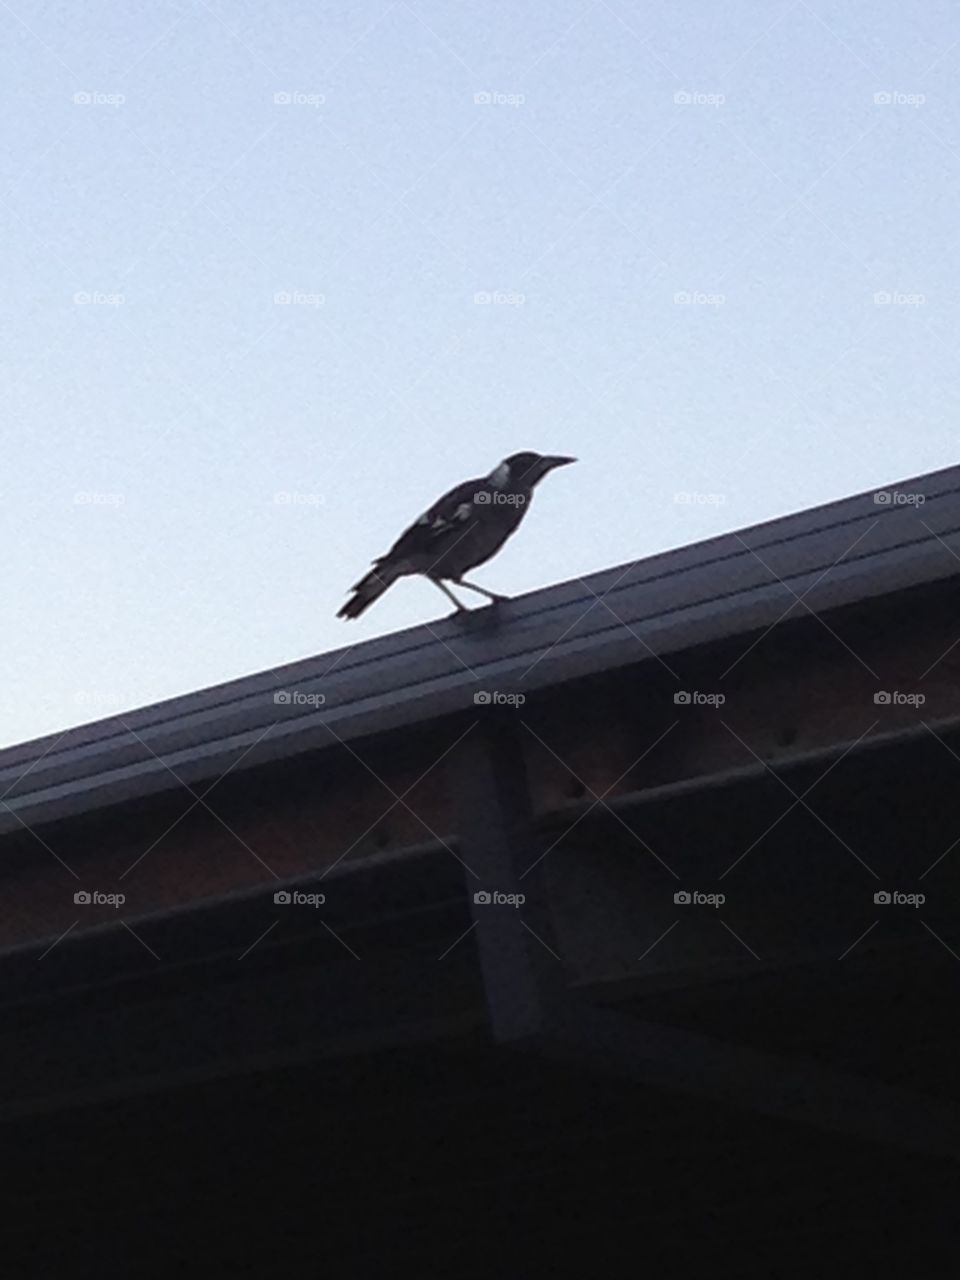 Magpie on the roof